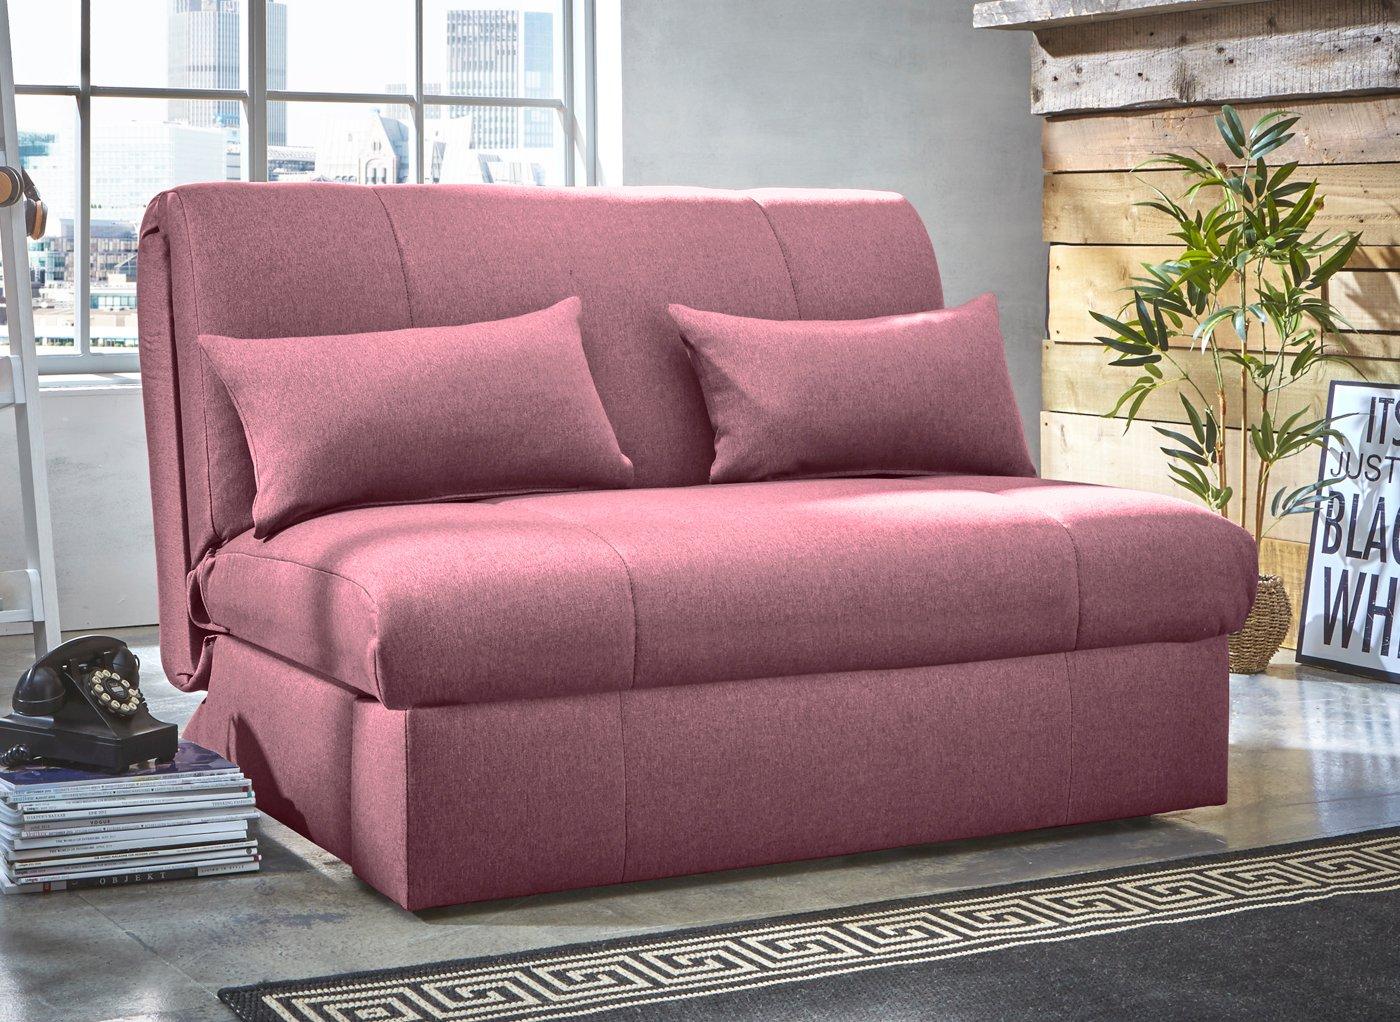 purple sofa beds for cheap